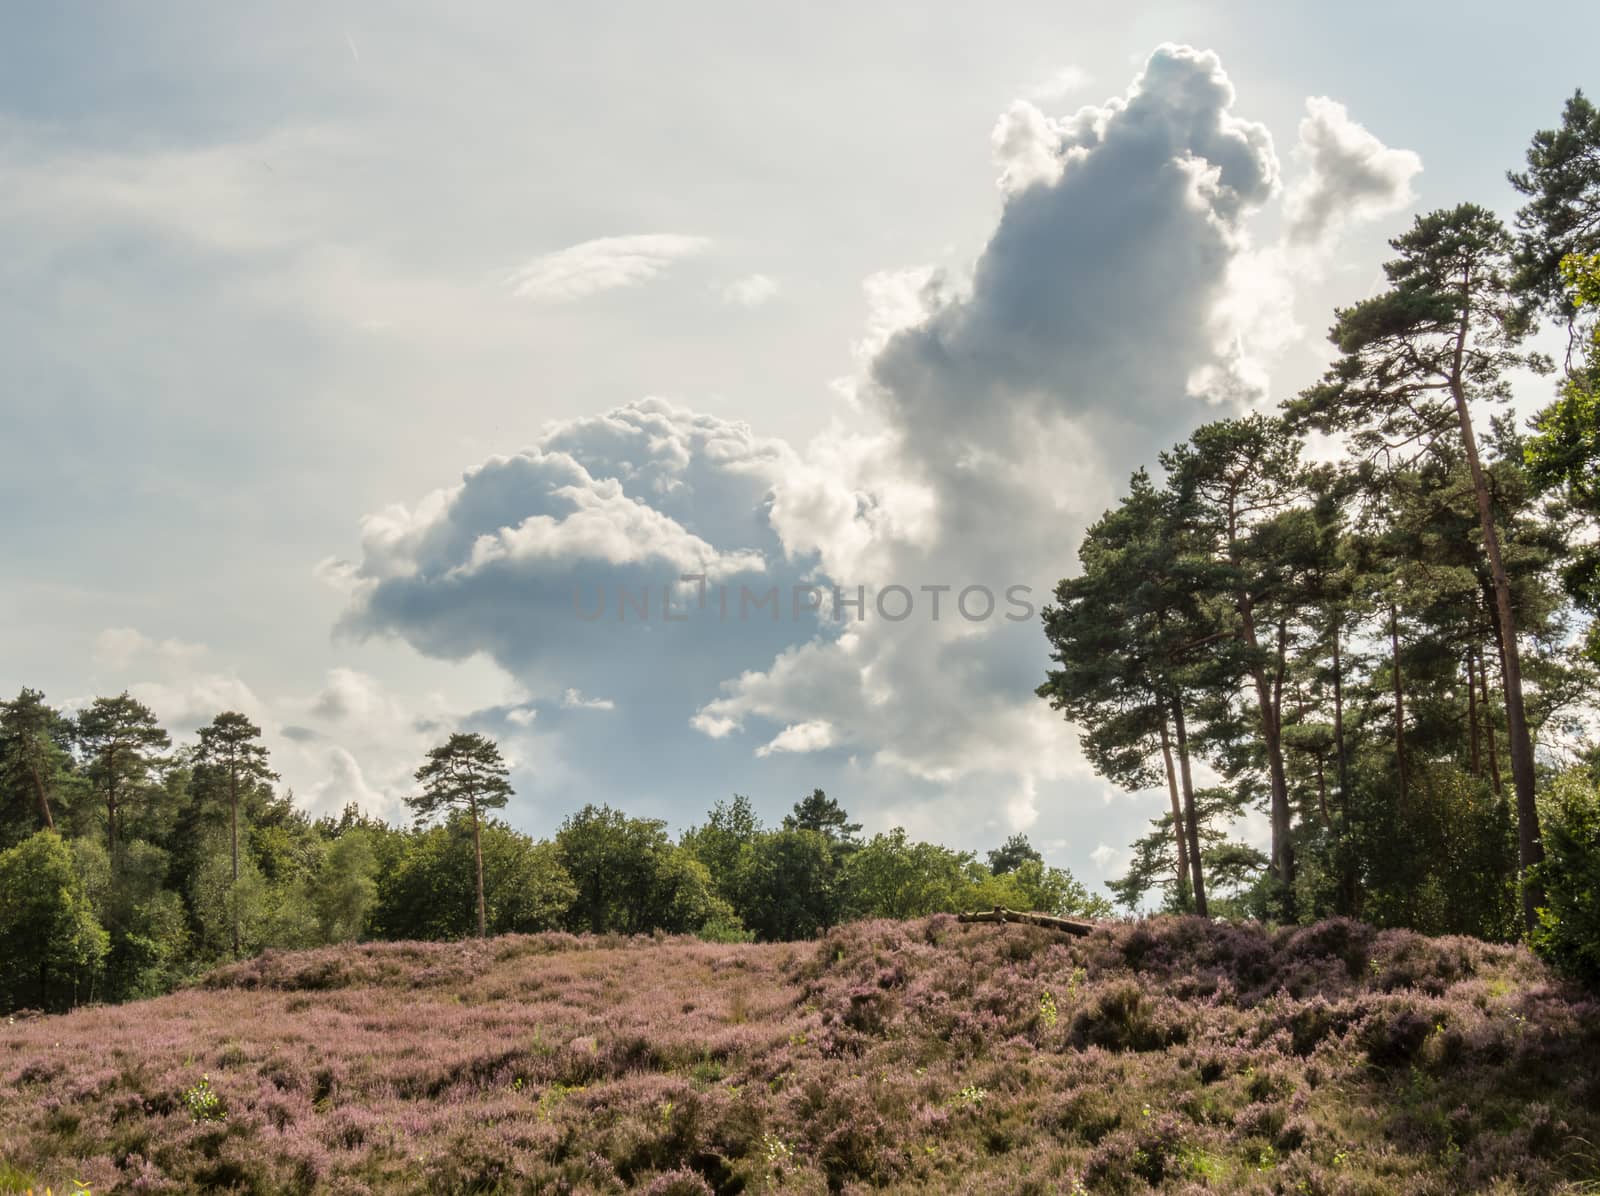 Colorful heathland scene with a dramatic cloud hanging overhead